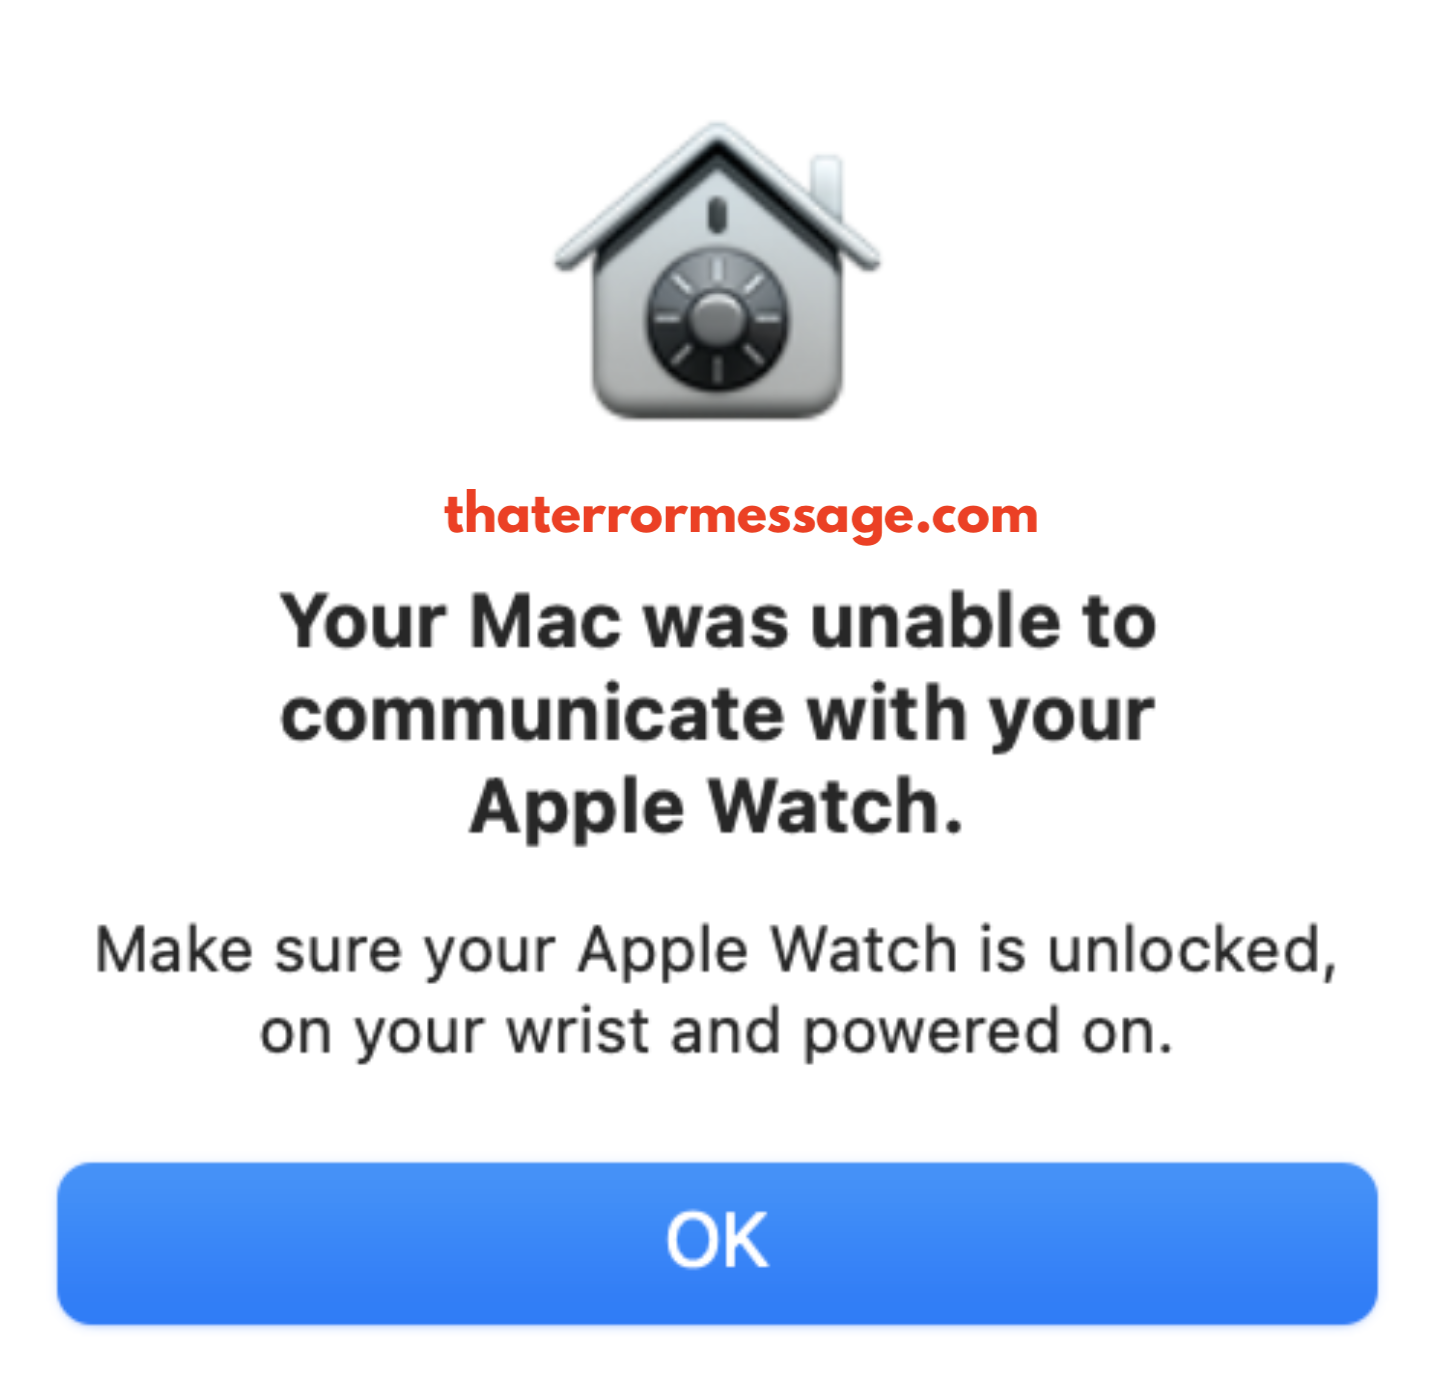 Your Mac Waas Unable To Communicate With Your Apple Watch